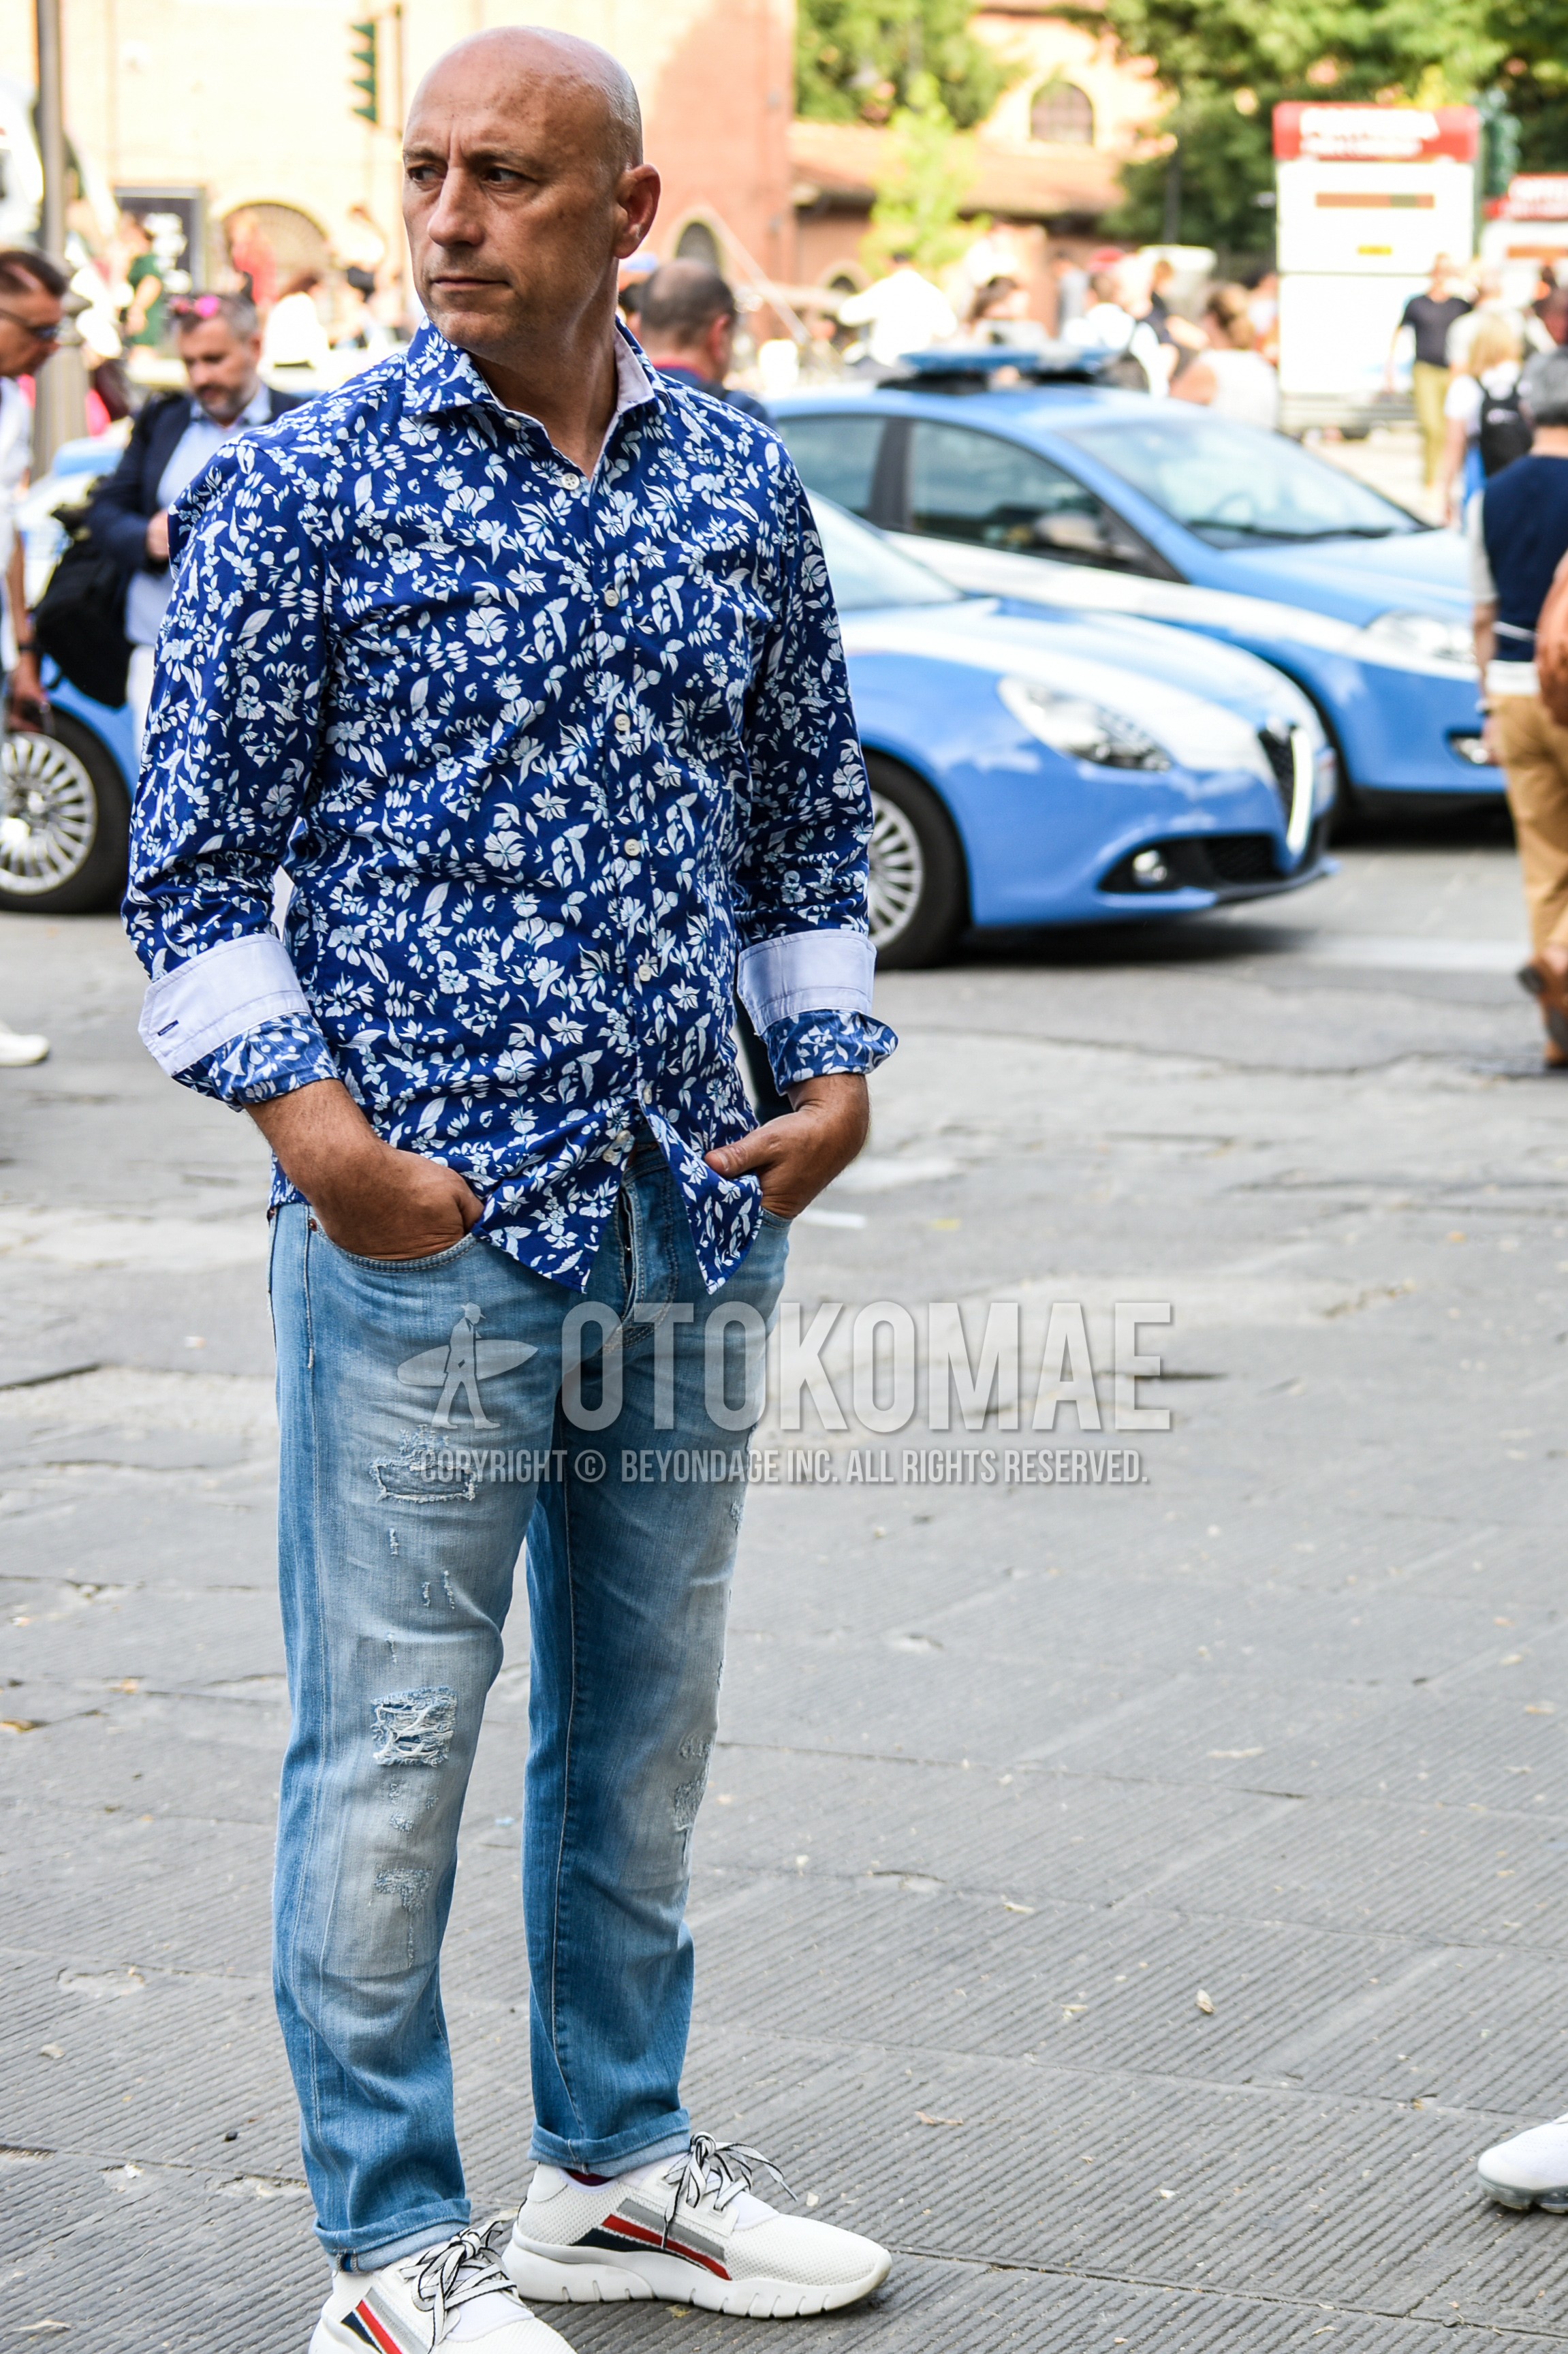 Men's spring autumn outfit with blue botanical shirt, blue plain damaged jeans, white low-cut sneakers.